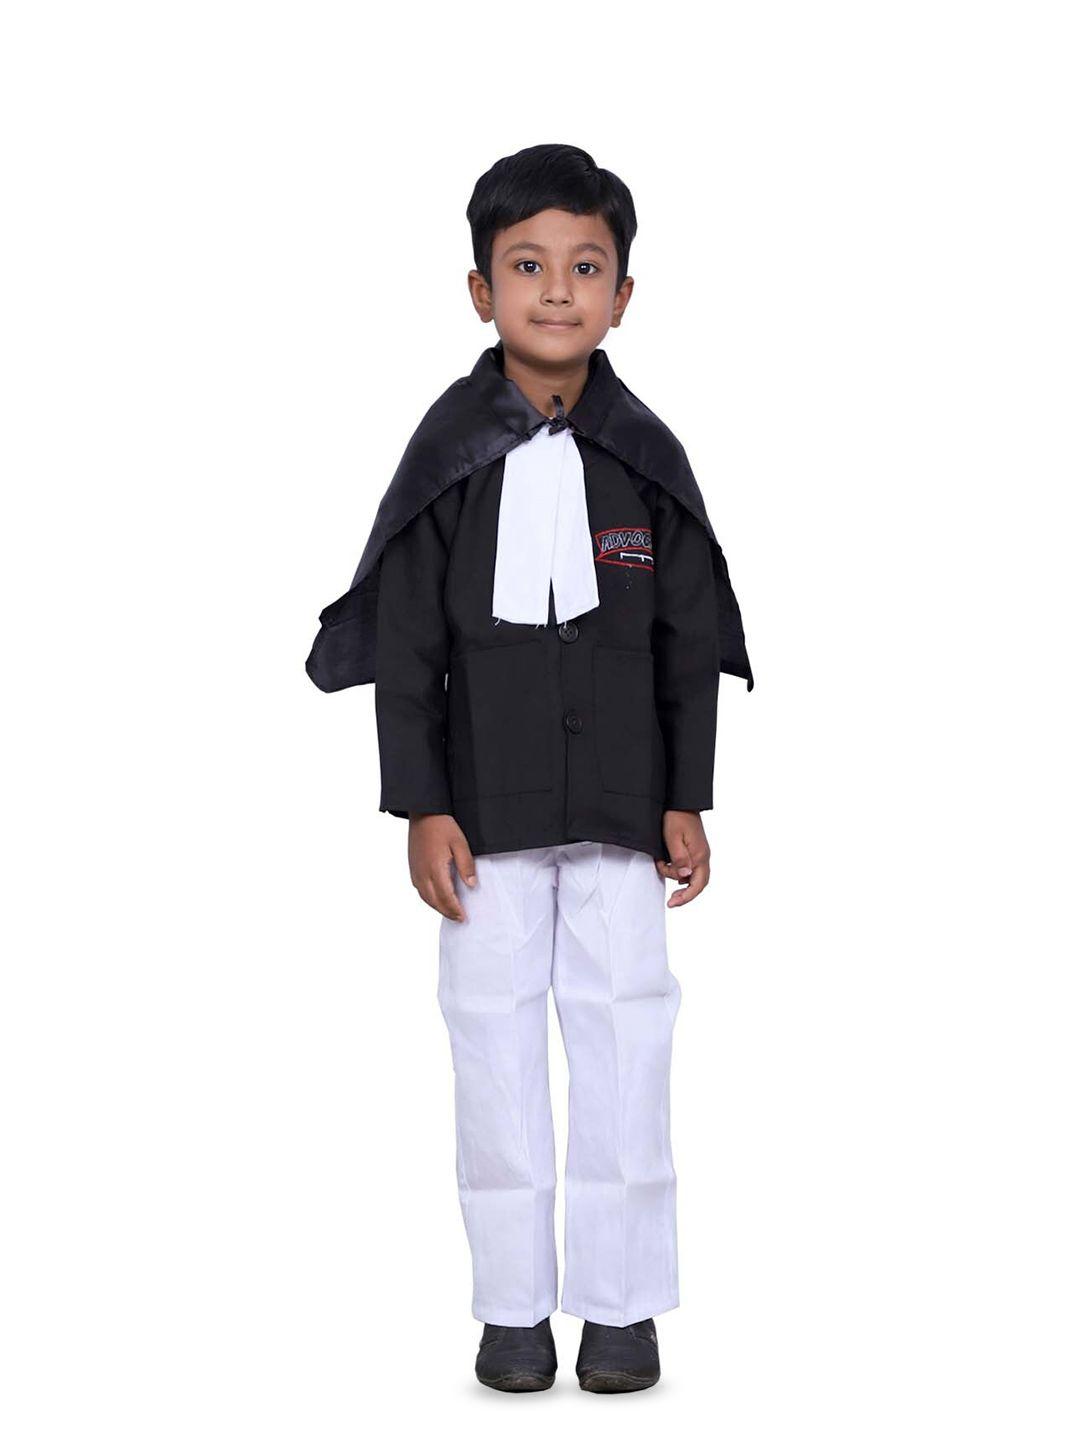 baesd kids advocate costume shirt with trousers